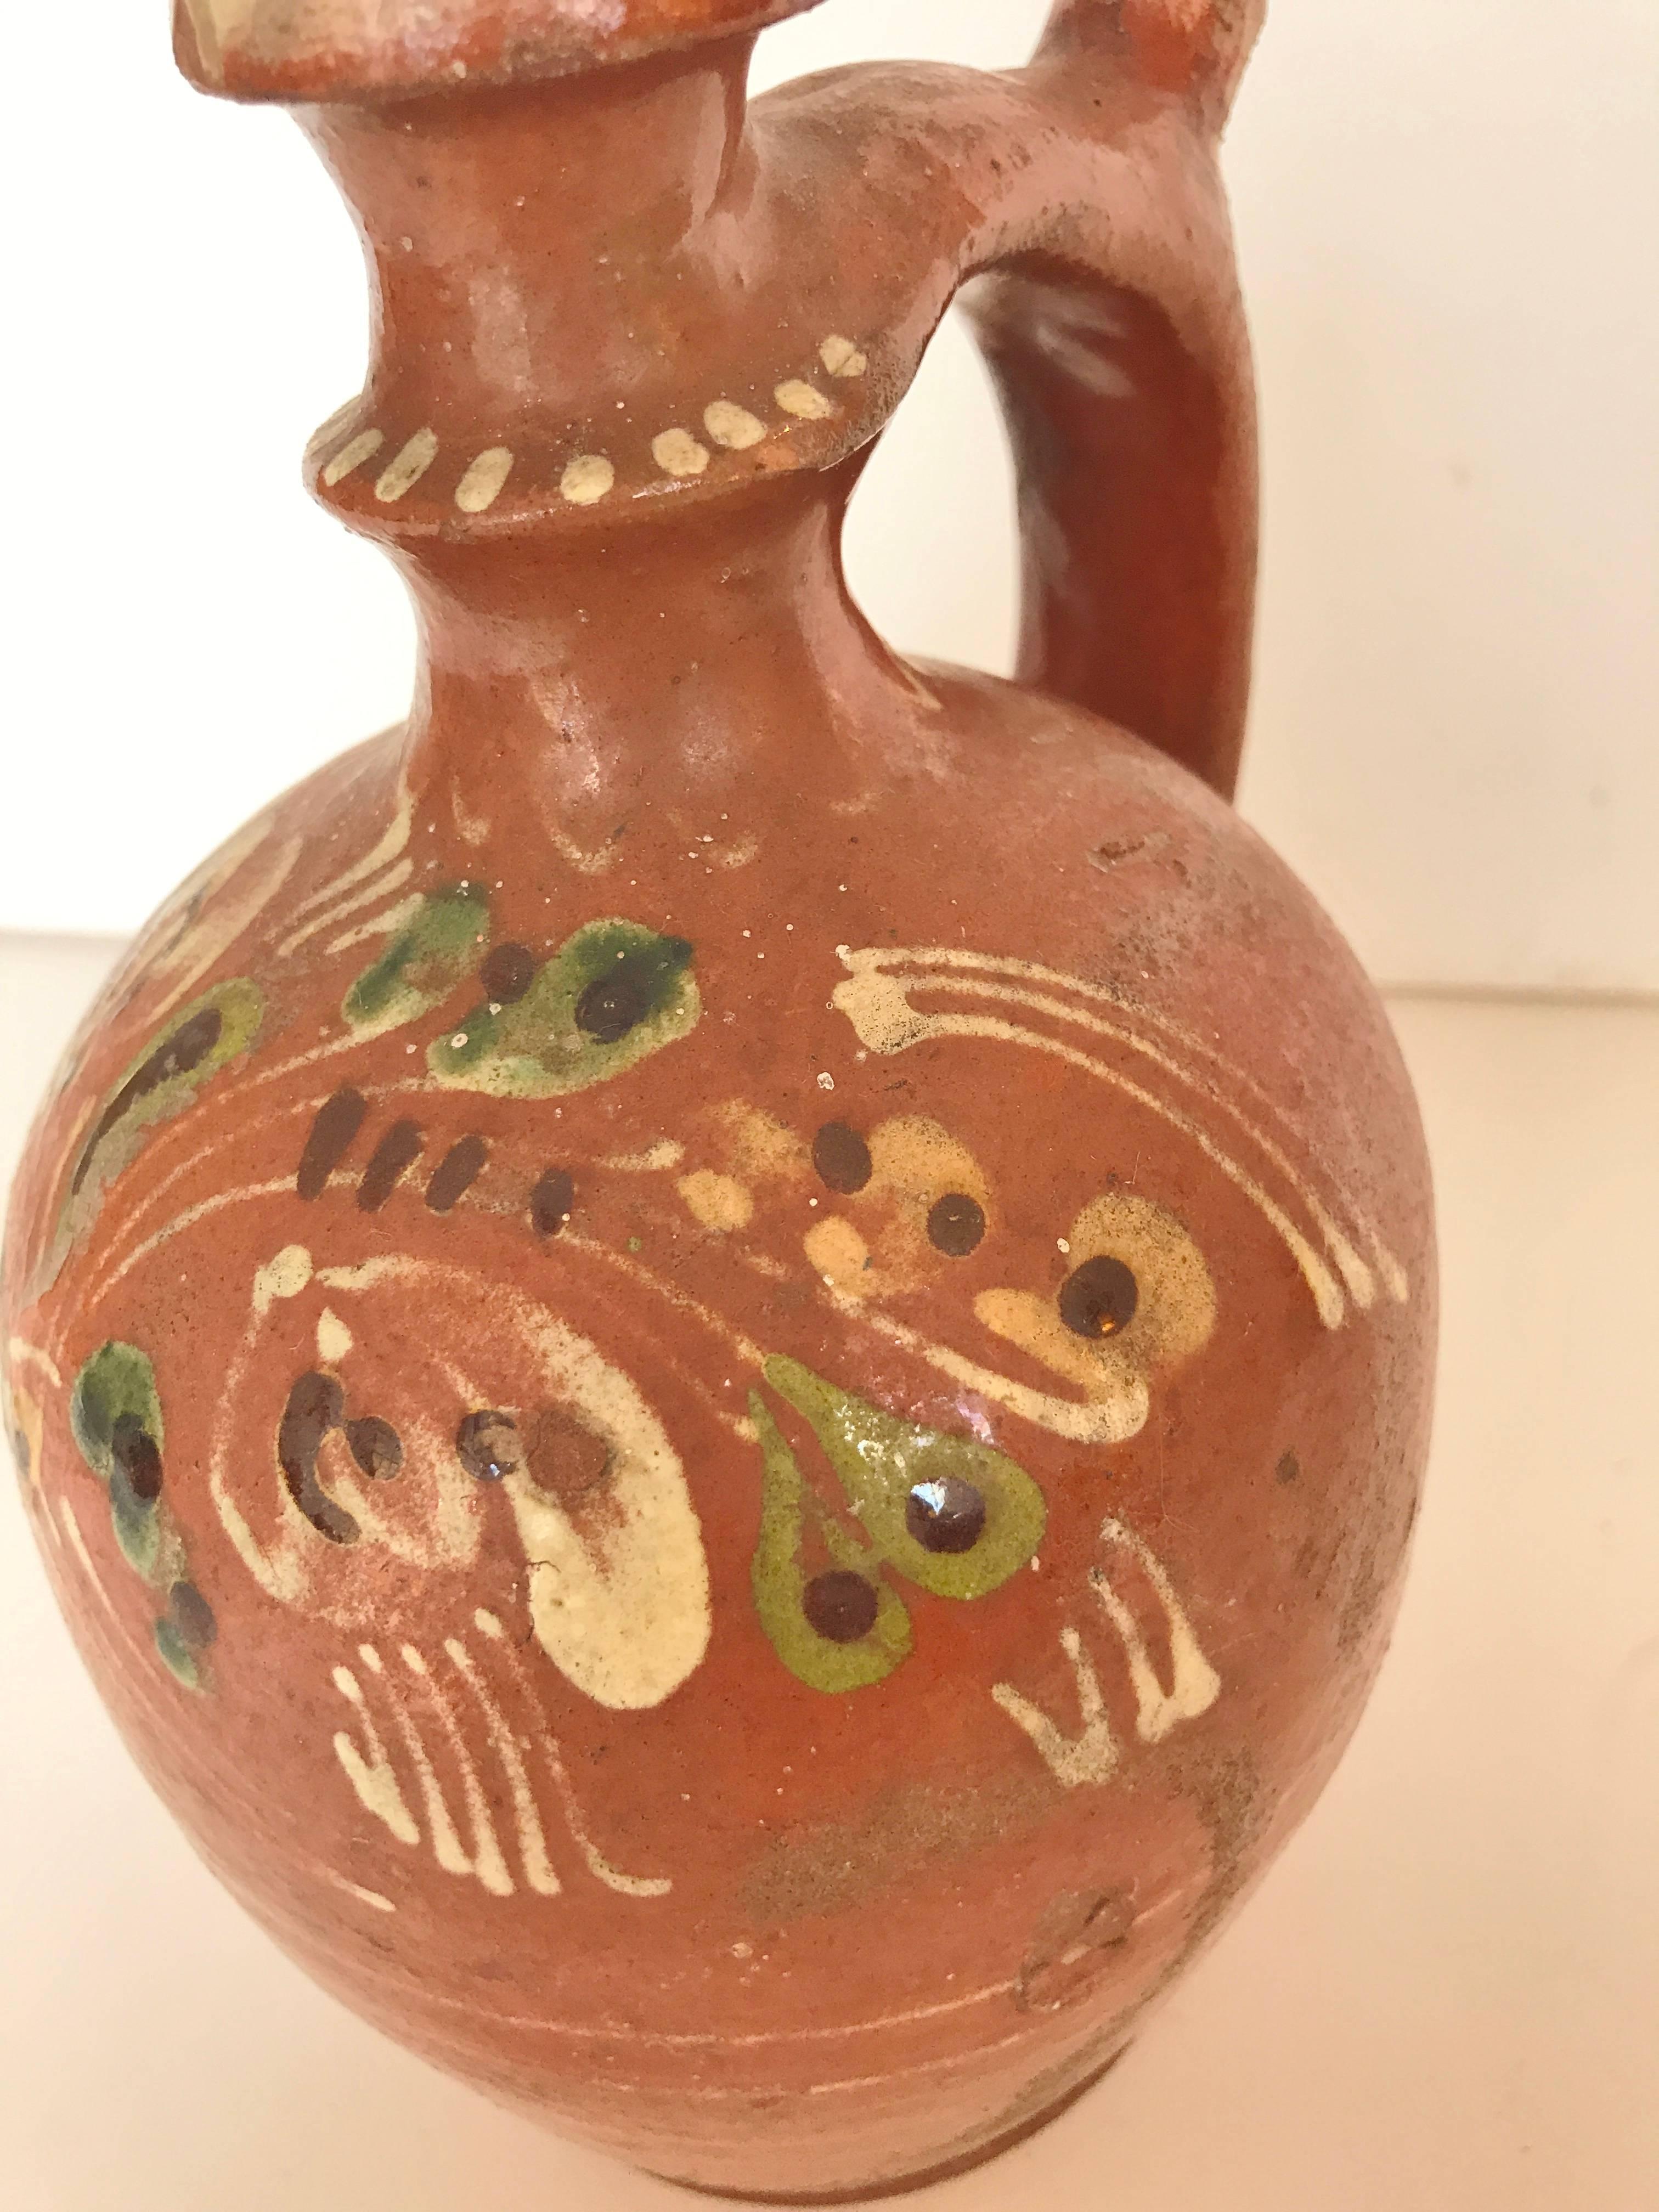 Vintage Romanian terra-cotta redware pottery with splatter glaze patterns.  From provincial eastern Europe, Transylvania.  Hand-painted carafe, jug, pot, traditional rustic pottery.  Folk art.